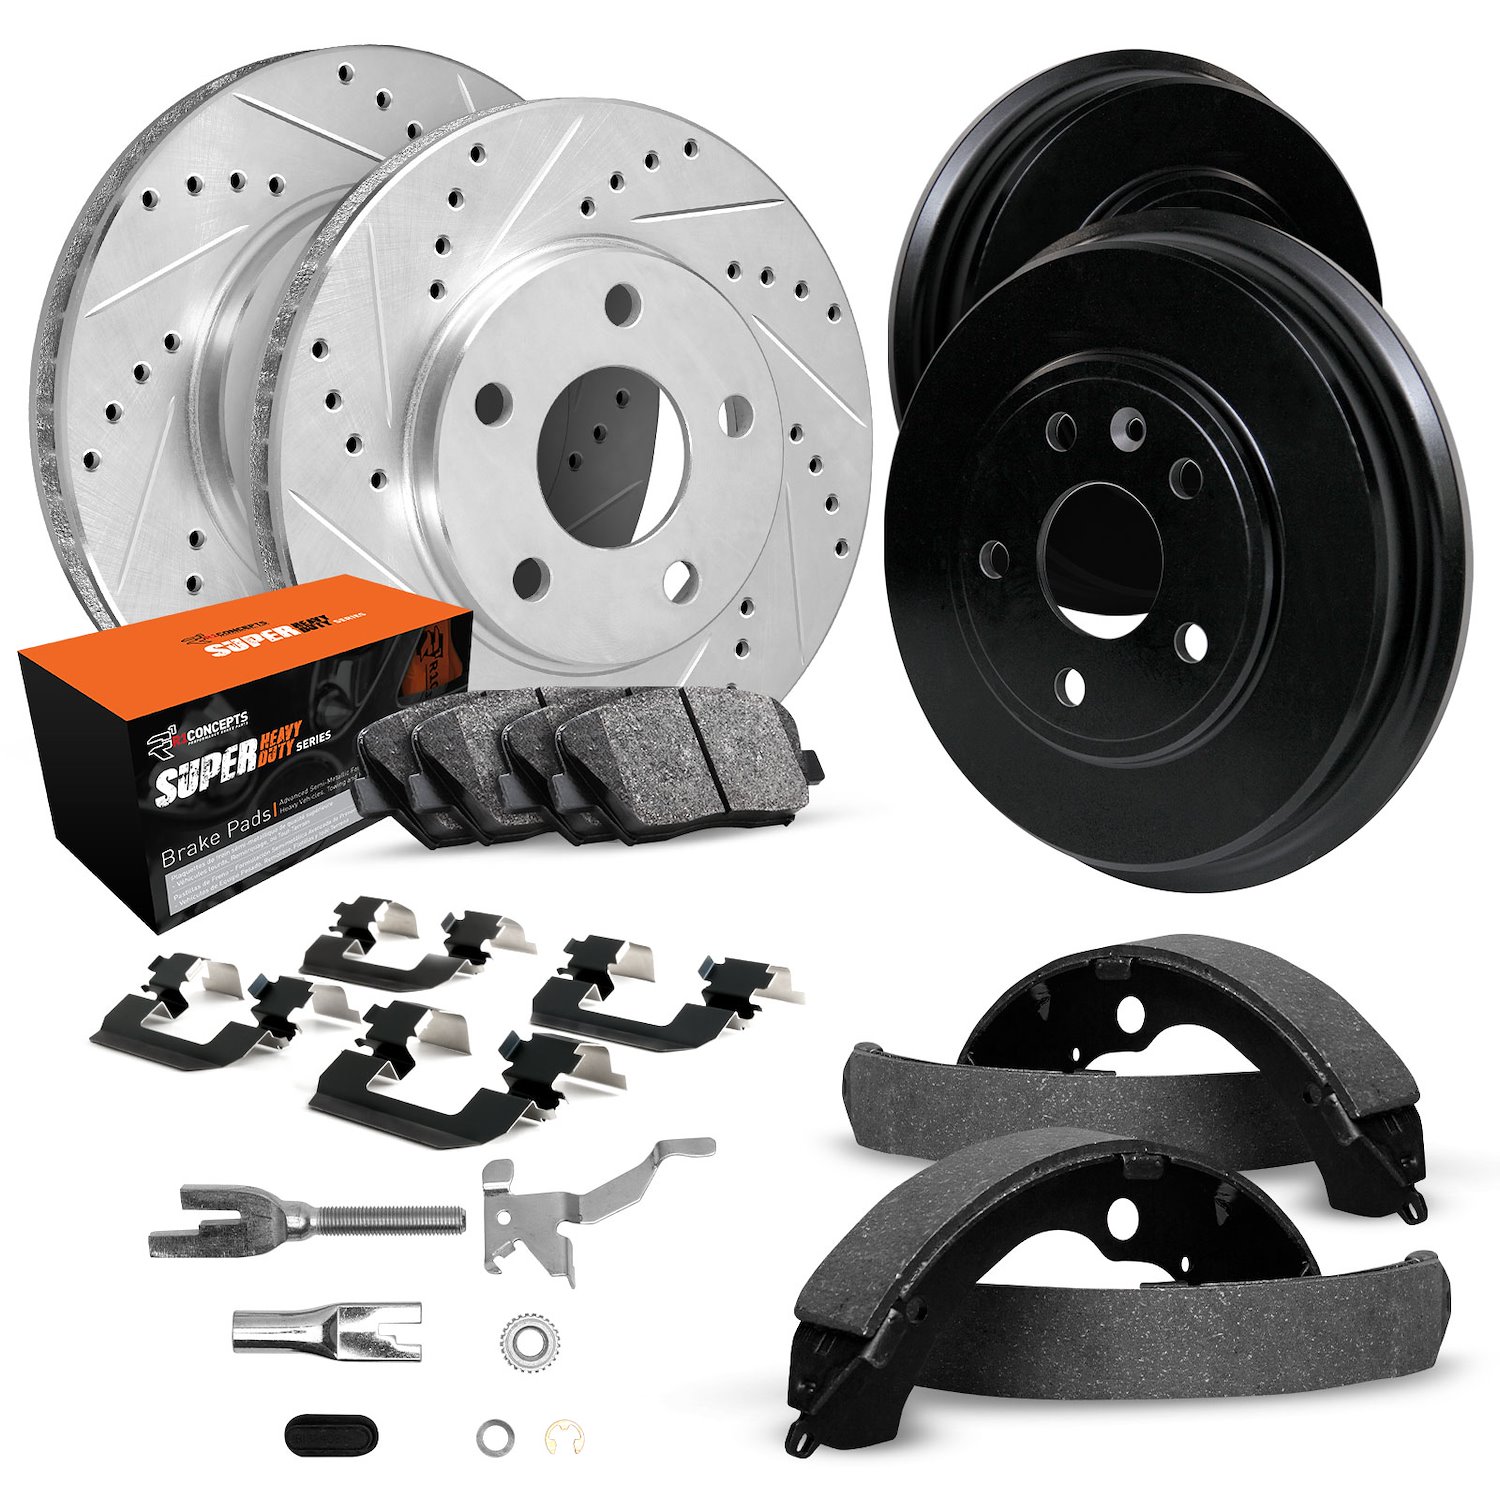 E-Line Drilled/Slotted Silver Rotor & Drum Set w/Super-Duty Pads, Shoes/Hardware/Adjusters, 1983-1994 Ford/Lincoln/Mercury/Mazda